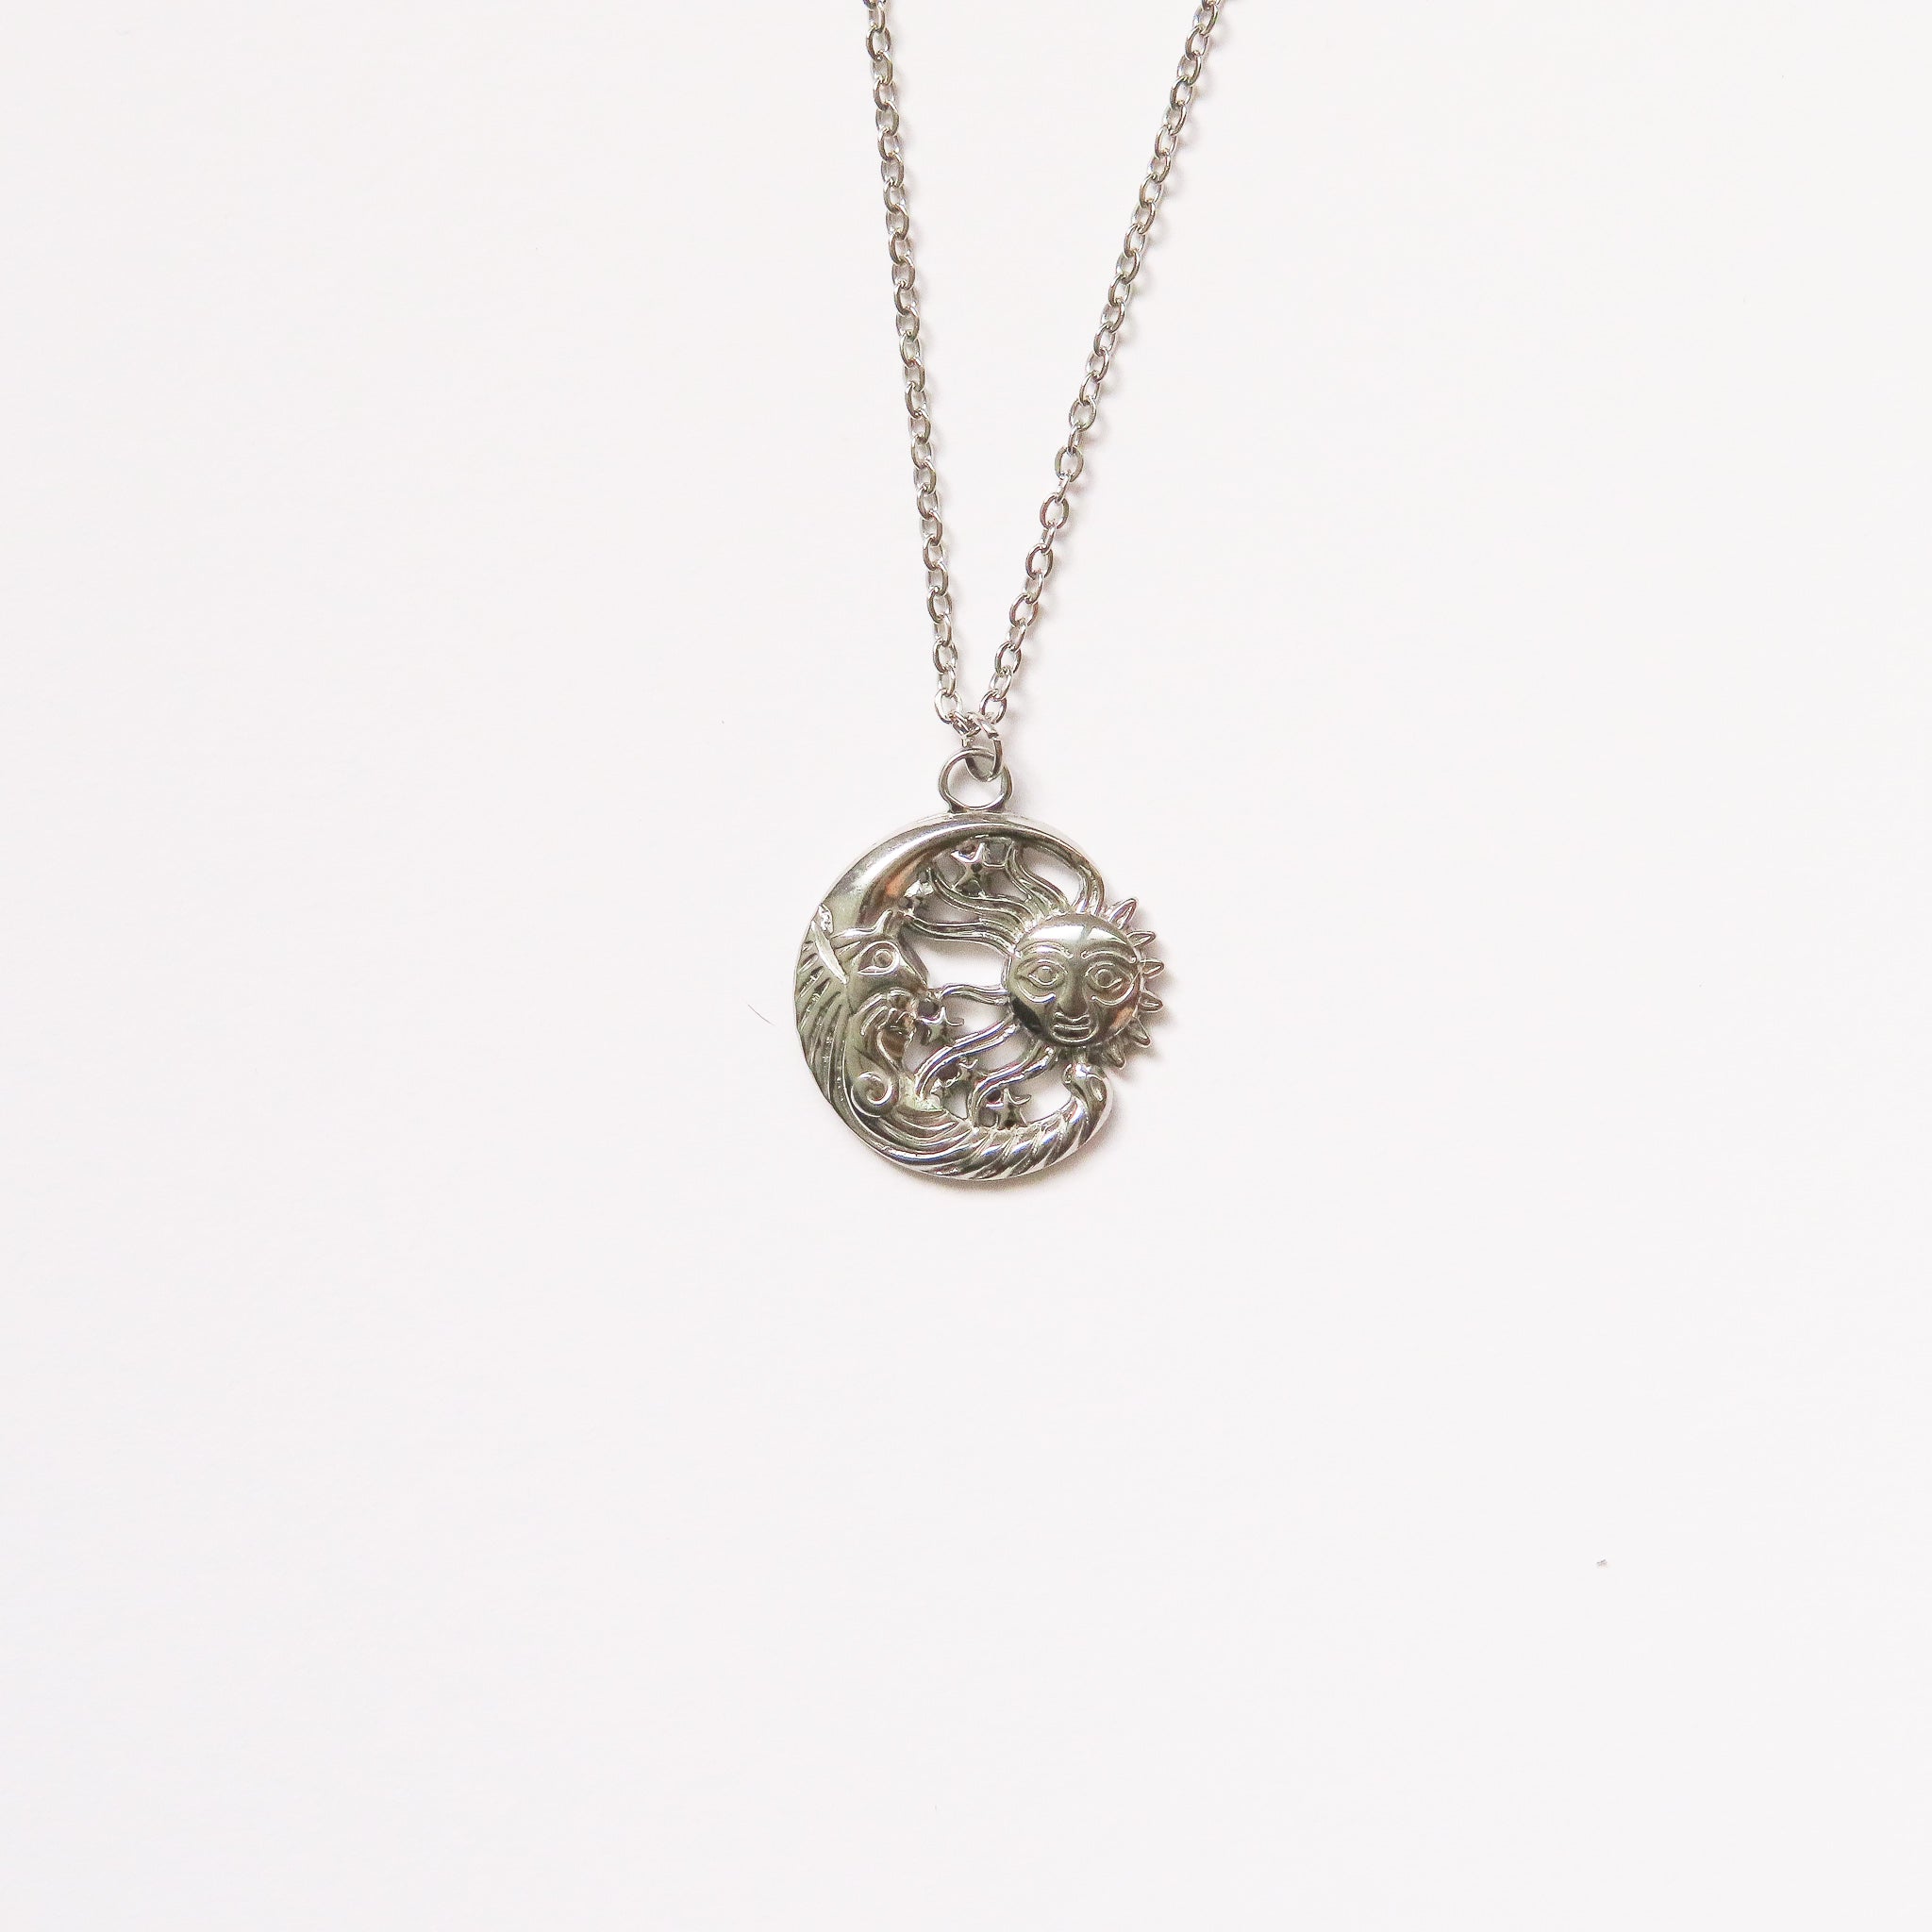 Old Moon and Sun Necklace